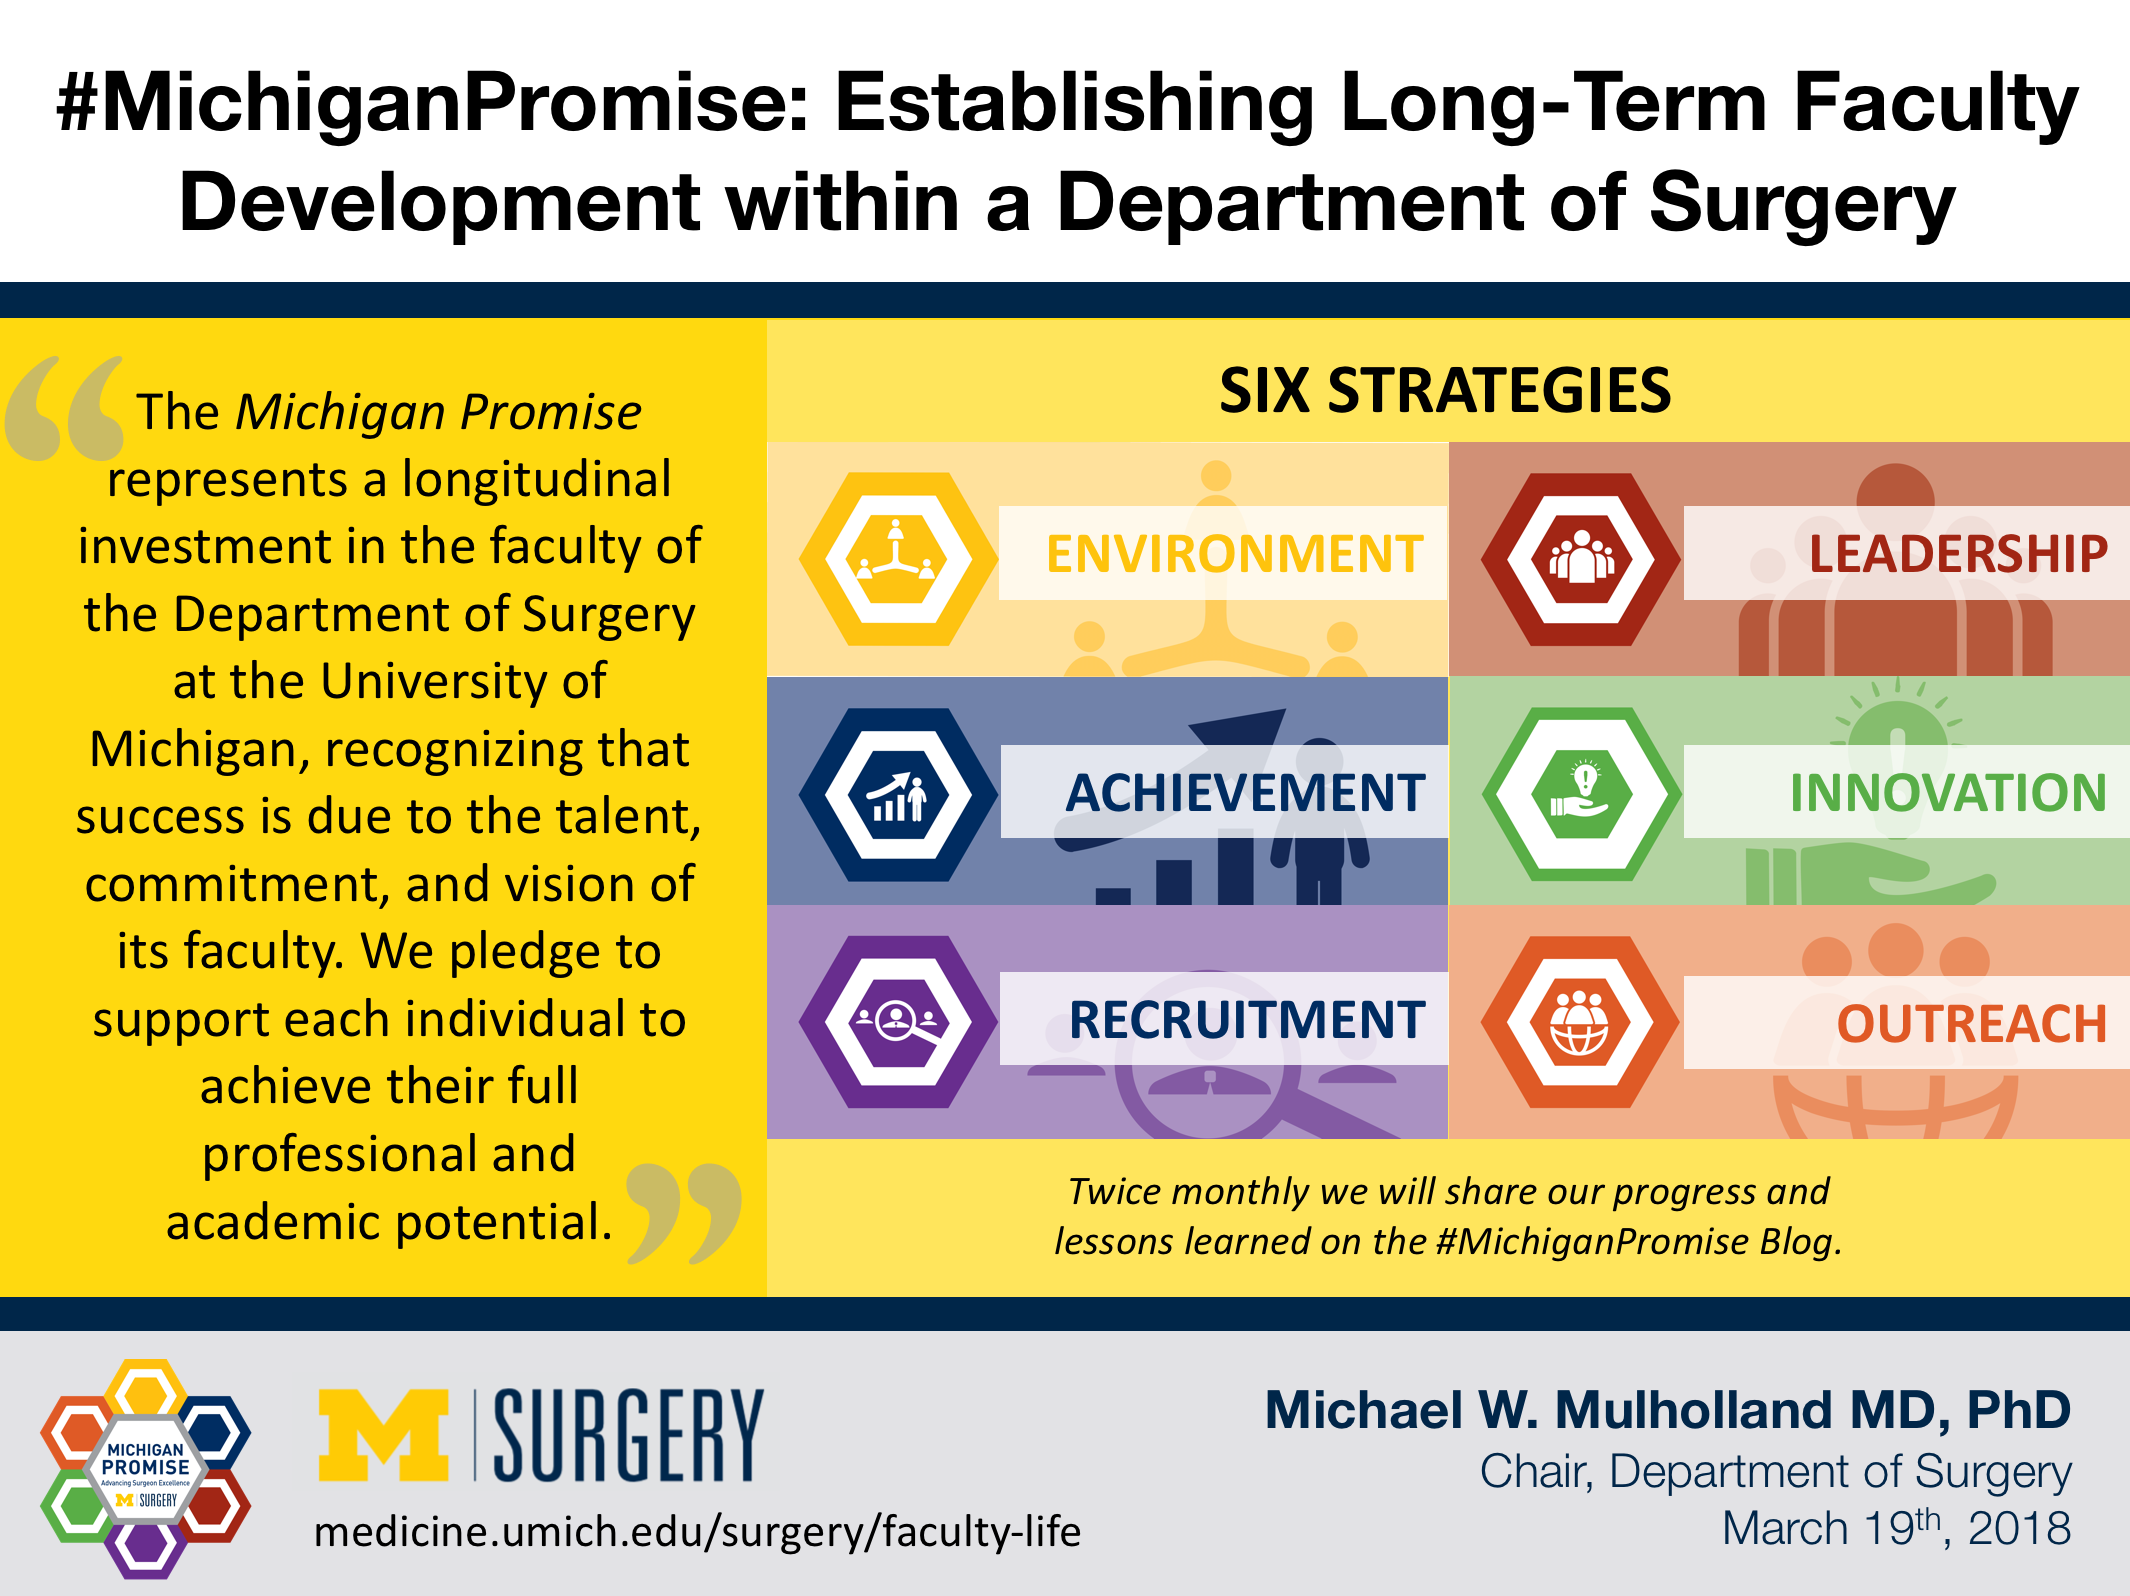 Twice monthly we will share our progress and lessons learned on the #MichiganPromise blog.